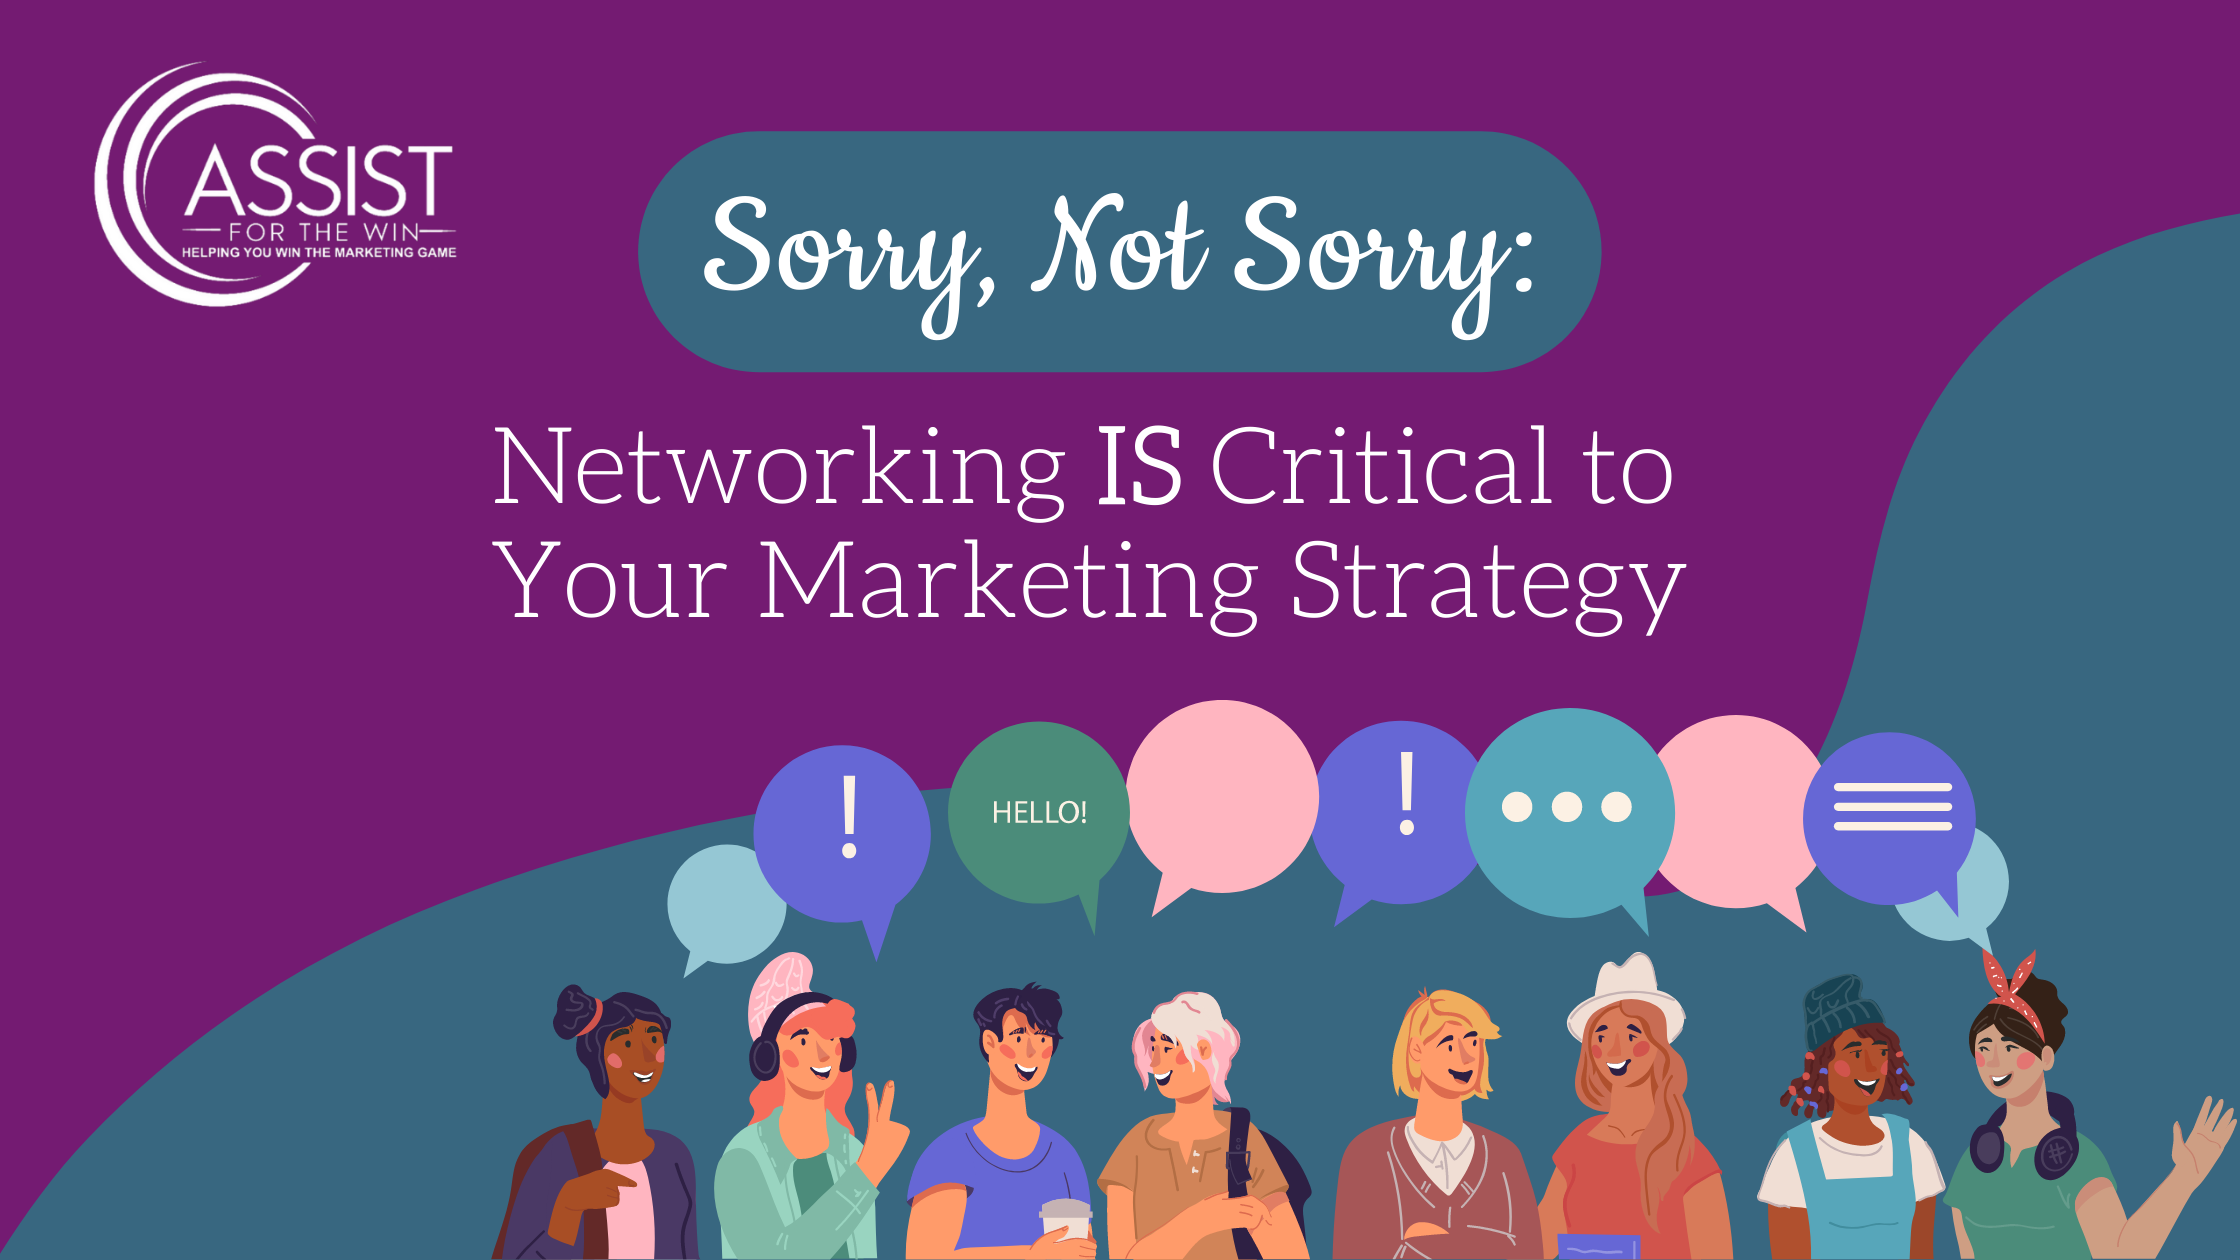 Sorry, Not Sorry: Networking IS Critical to Your Marketing Strategy